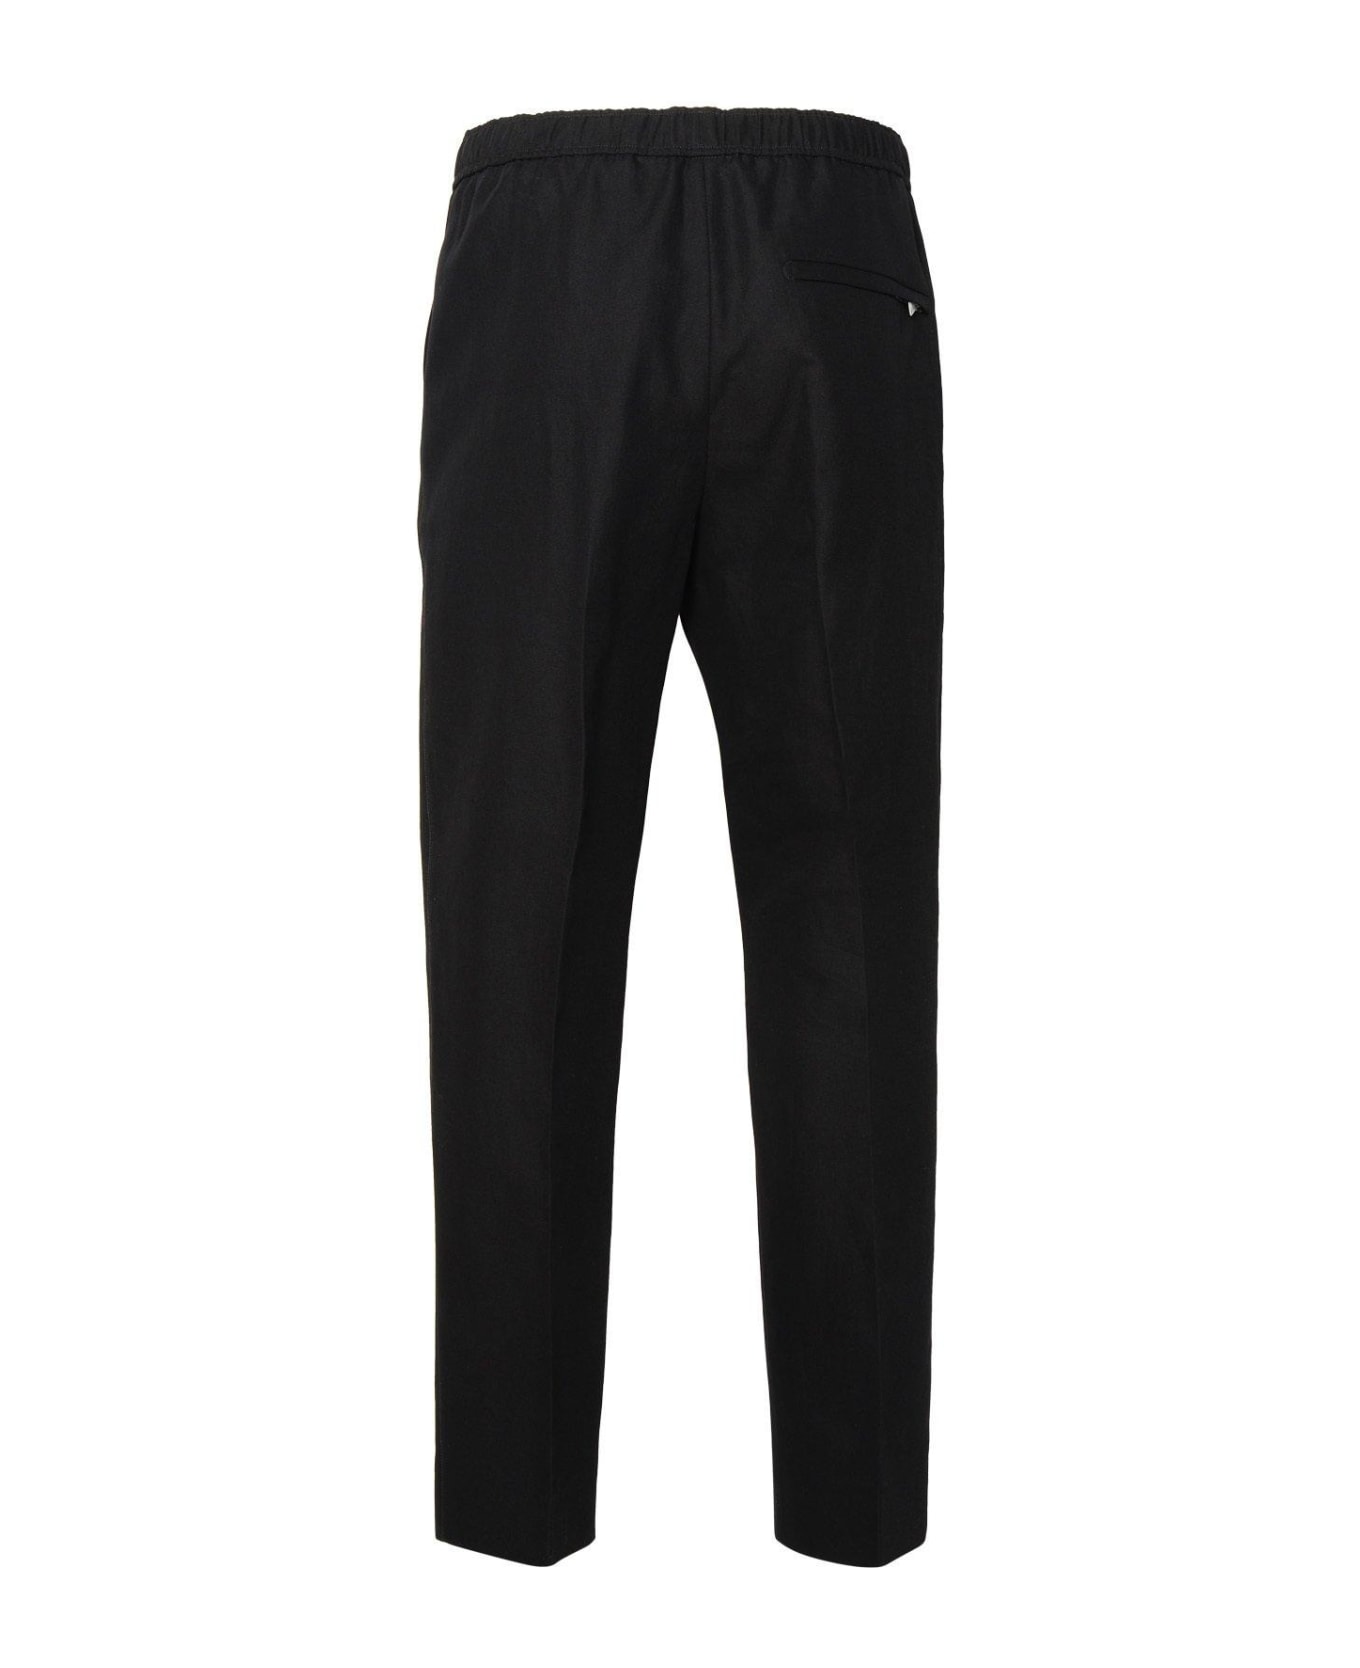 Lanvin Mid-rise Tapered Cropped Trousers - Nero ボトムス